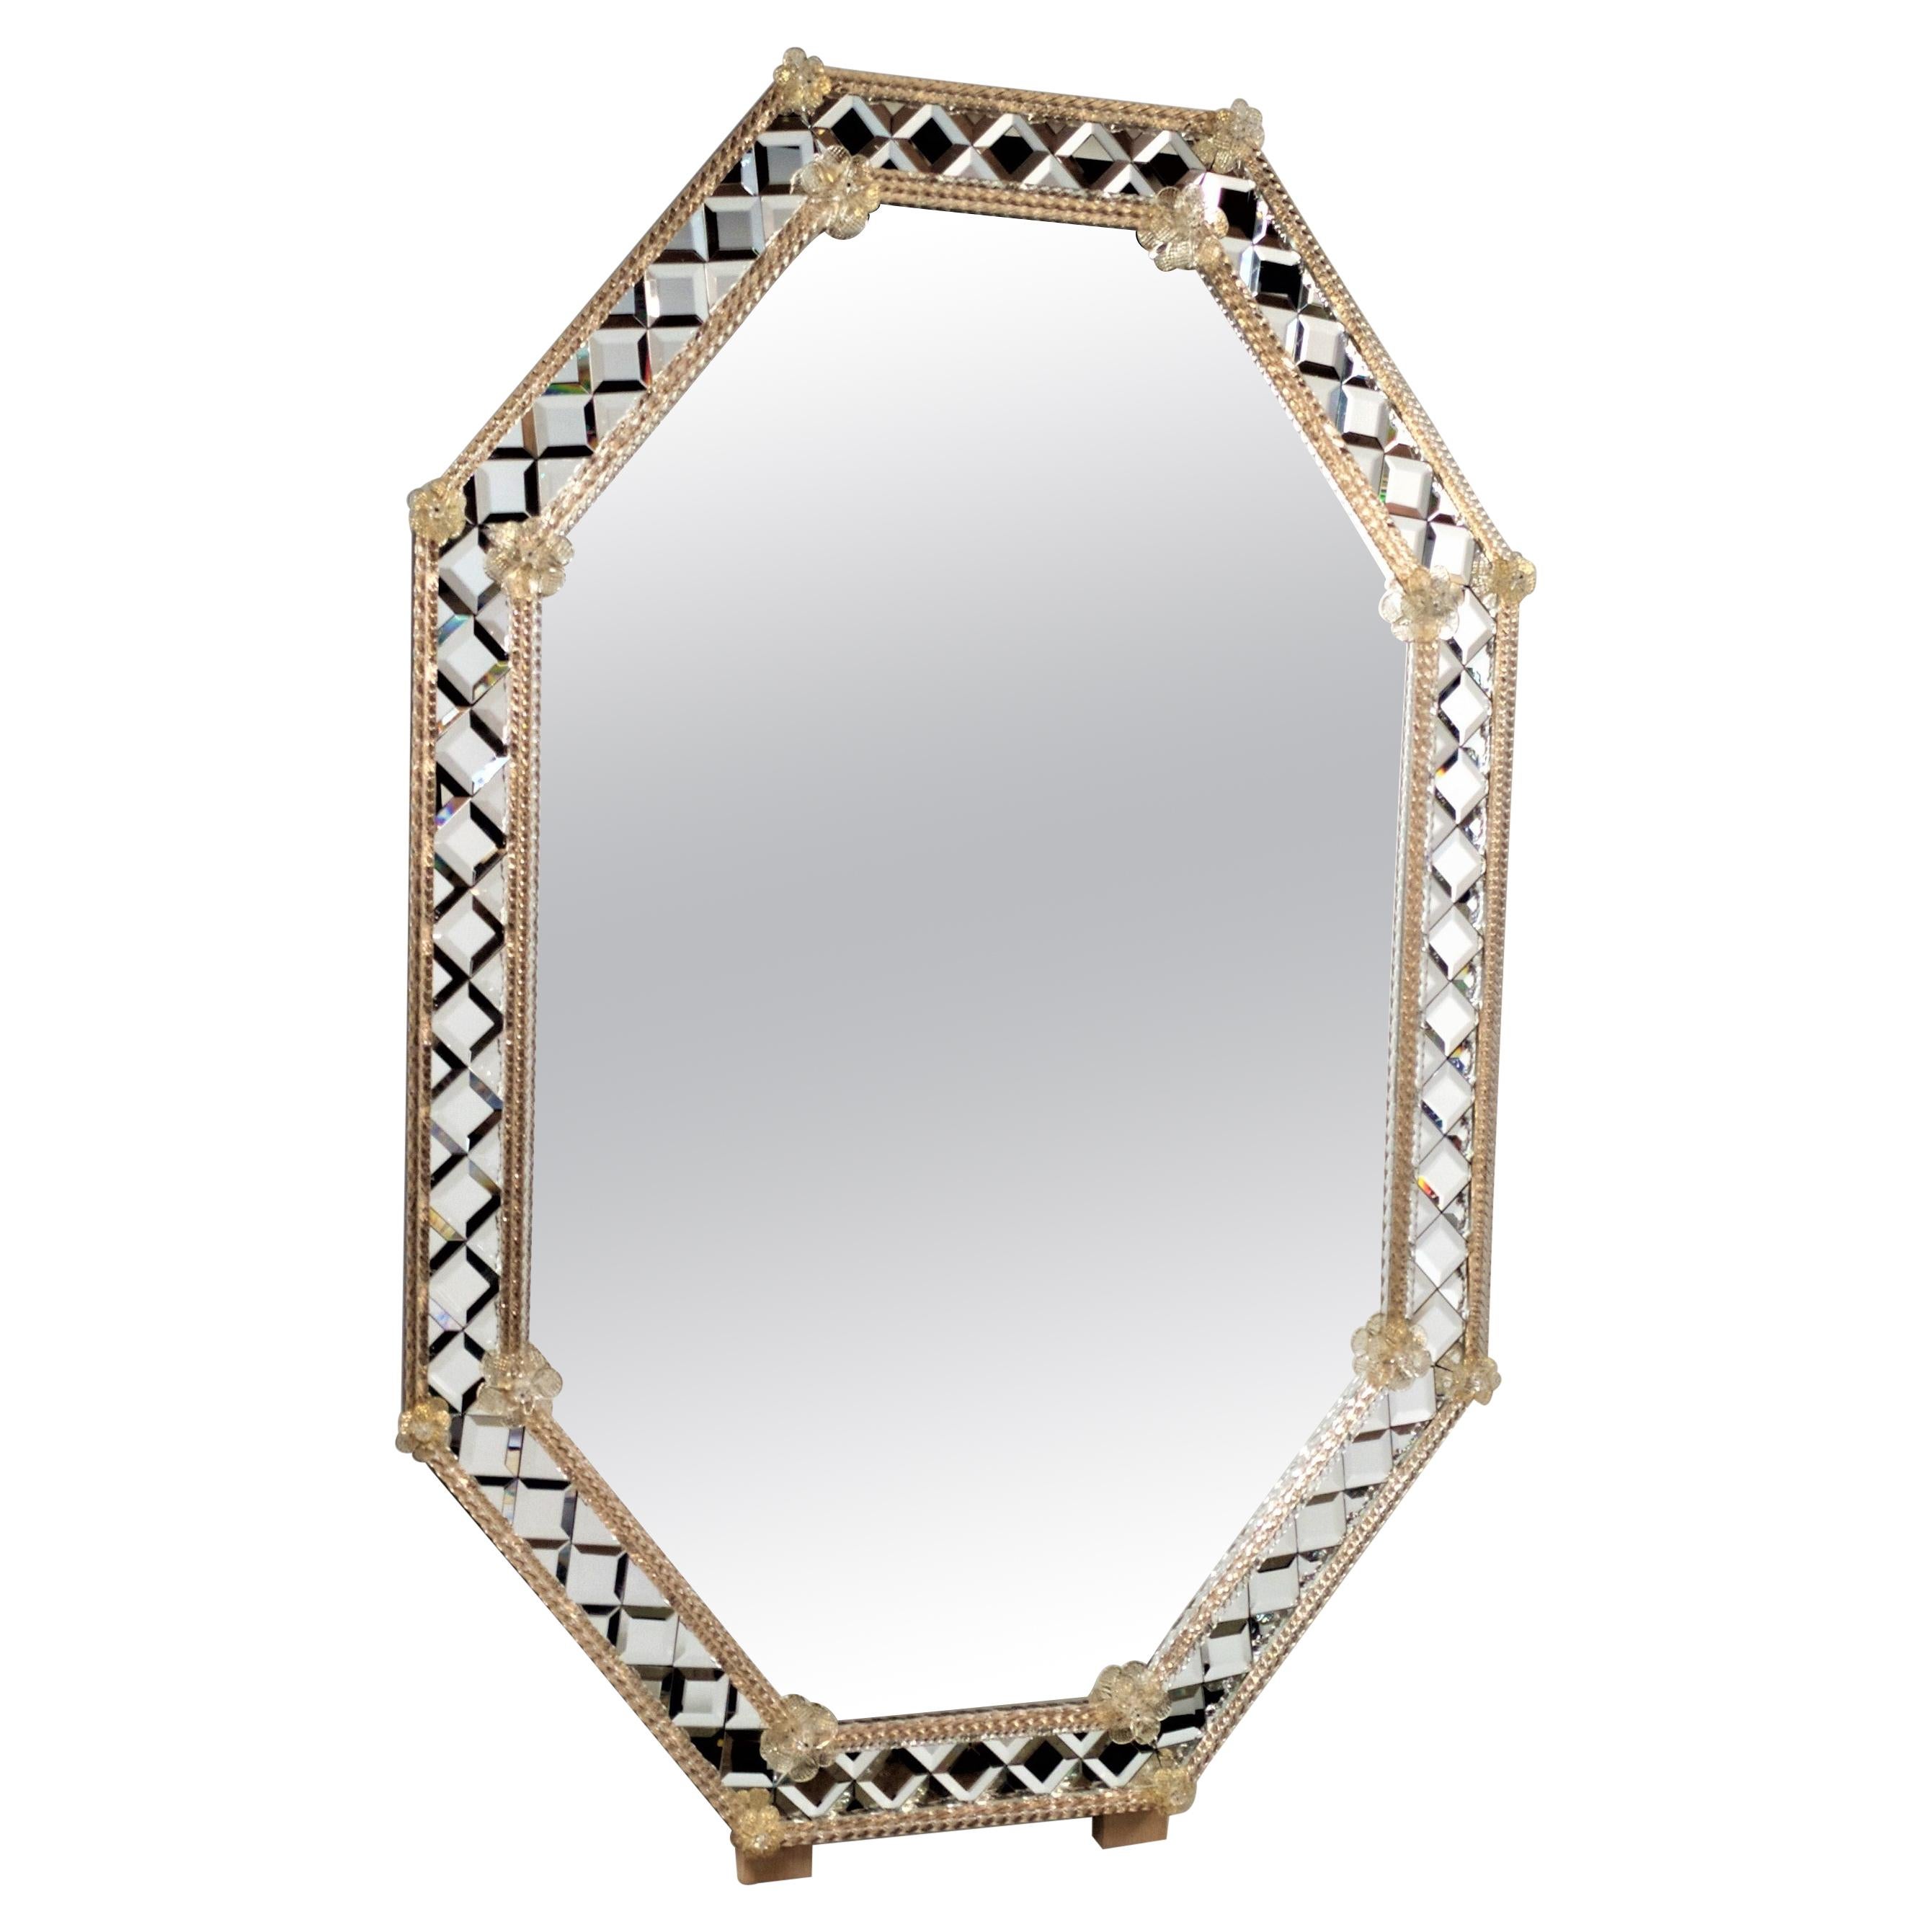 "Diamond" Murano Glass Mirror Octagonal, Hand Made, Fratelli Tosi Made in Italy For Sale